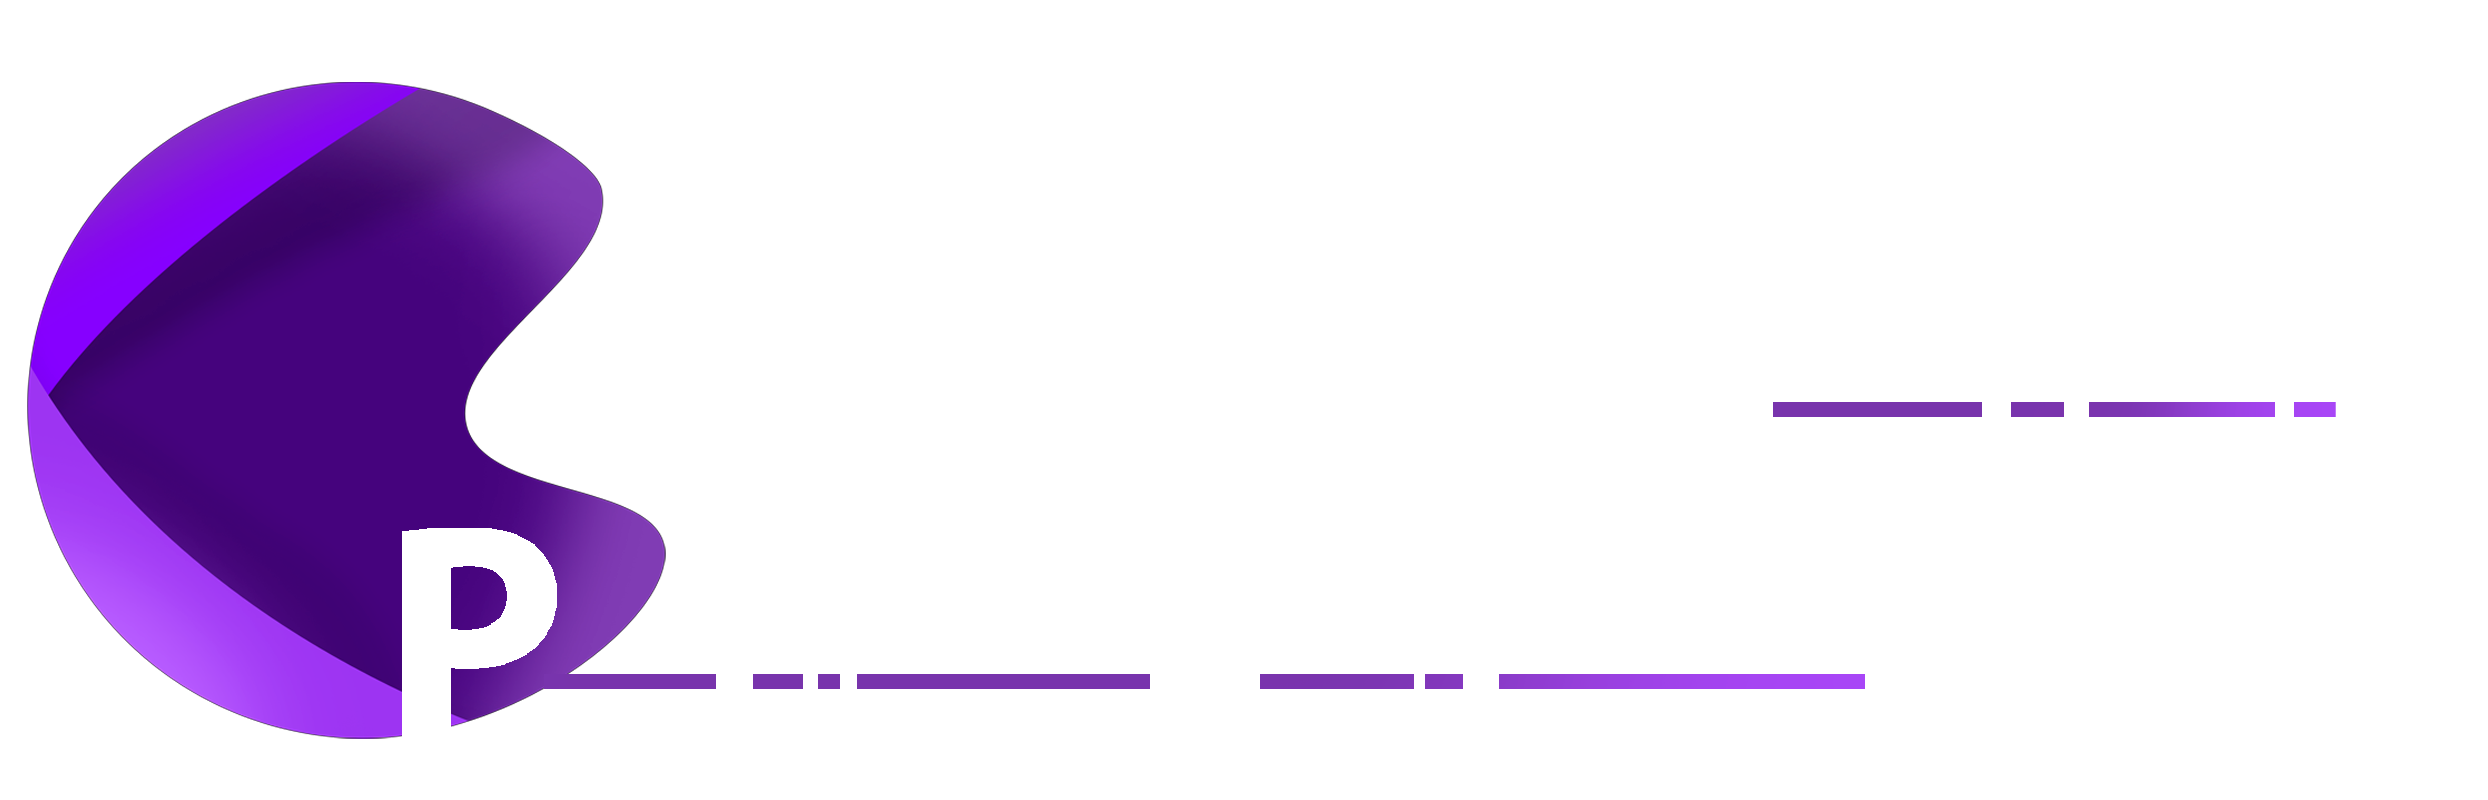 coachyourprojects.com